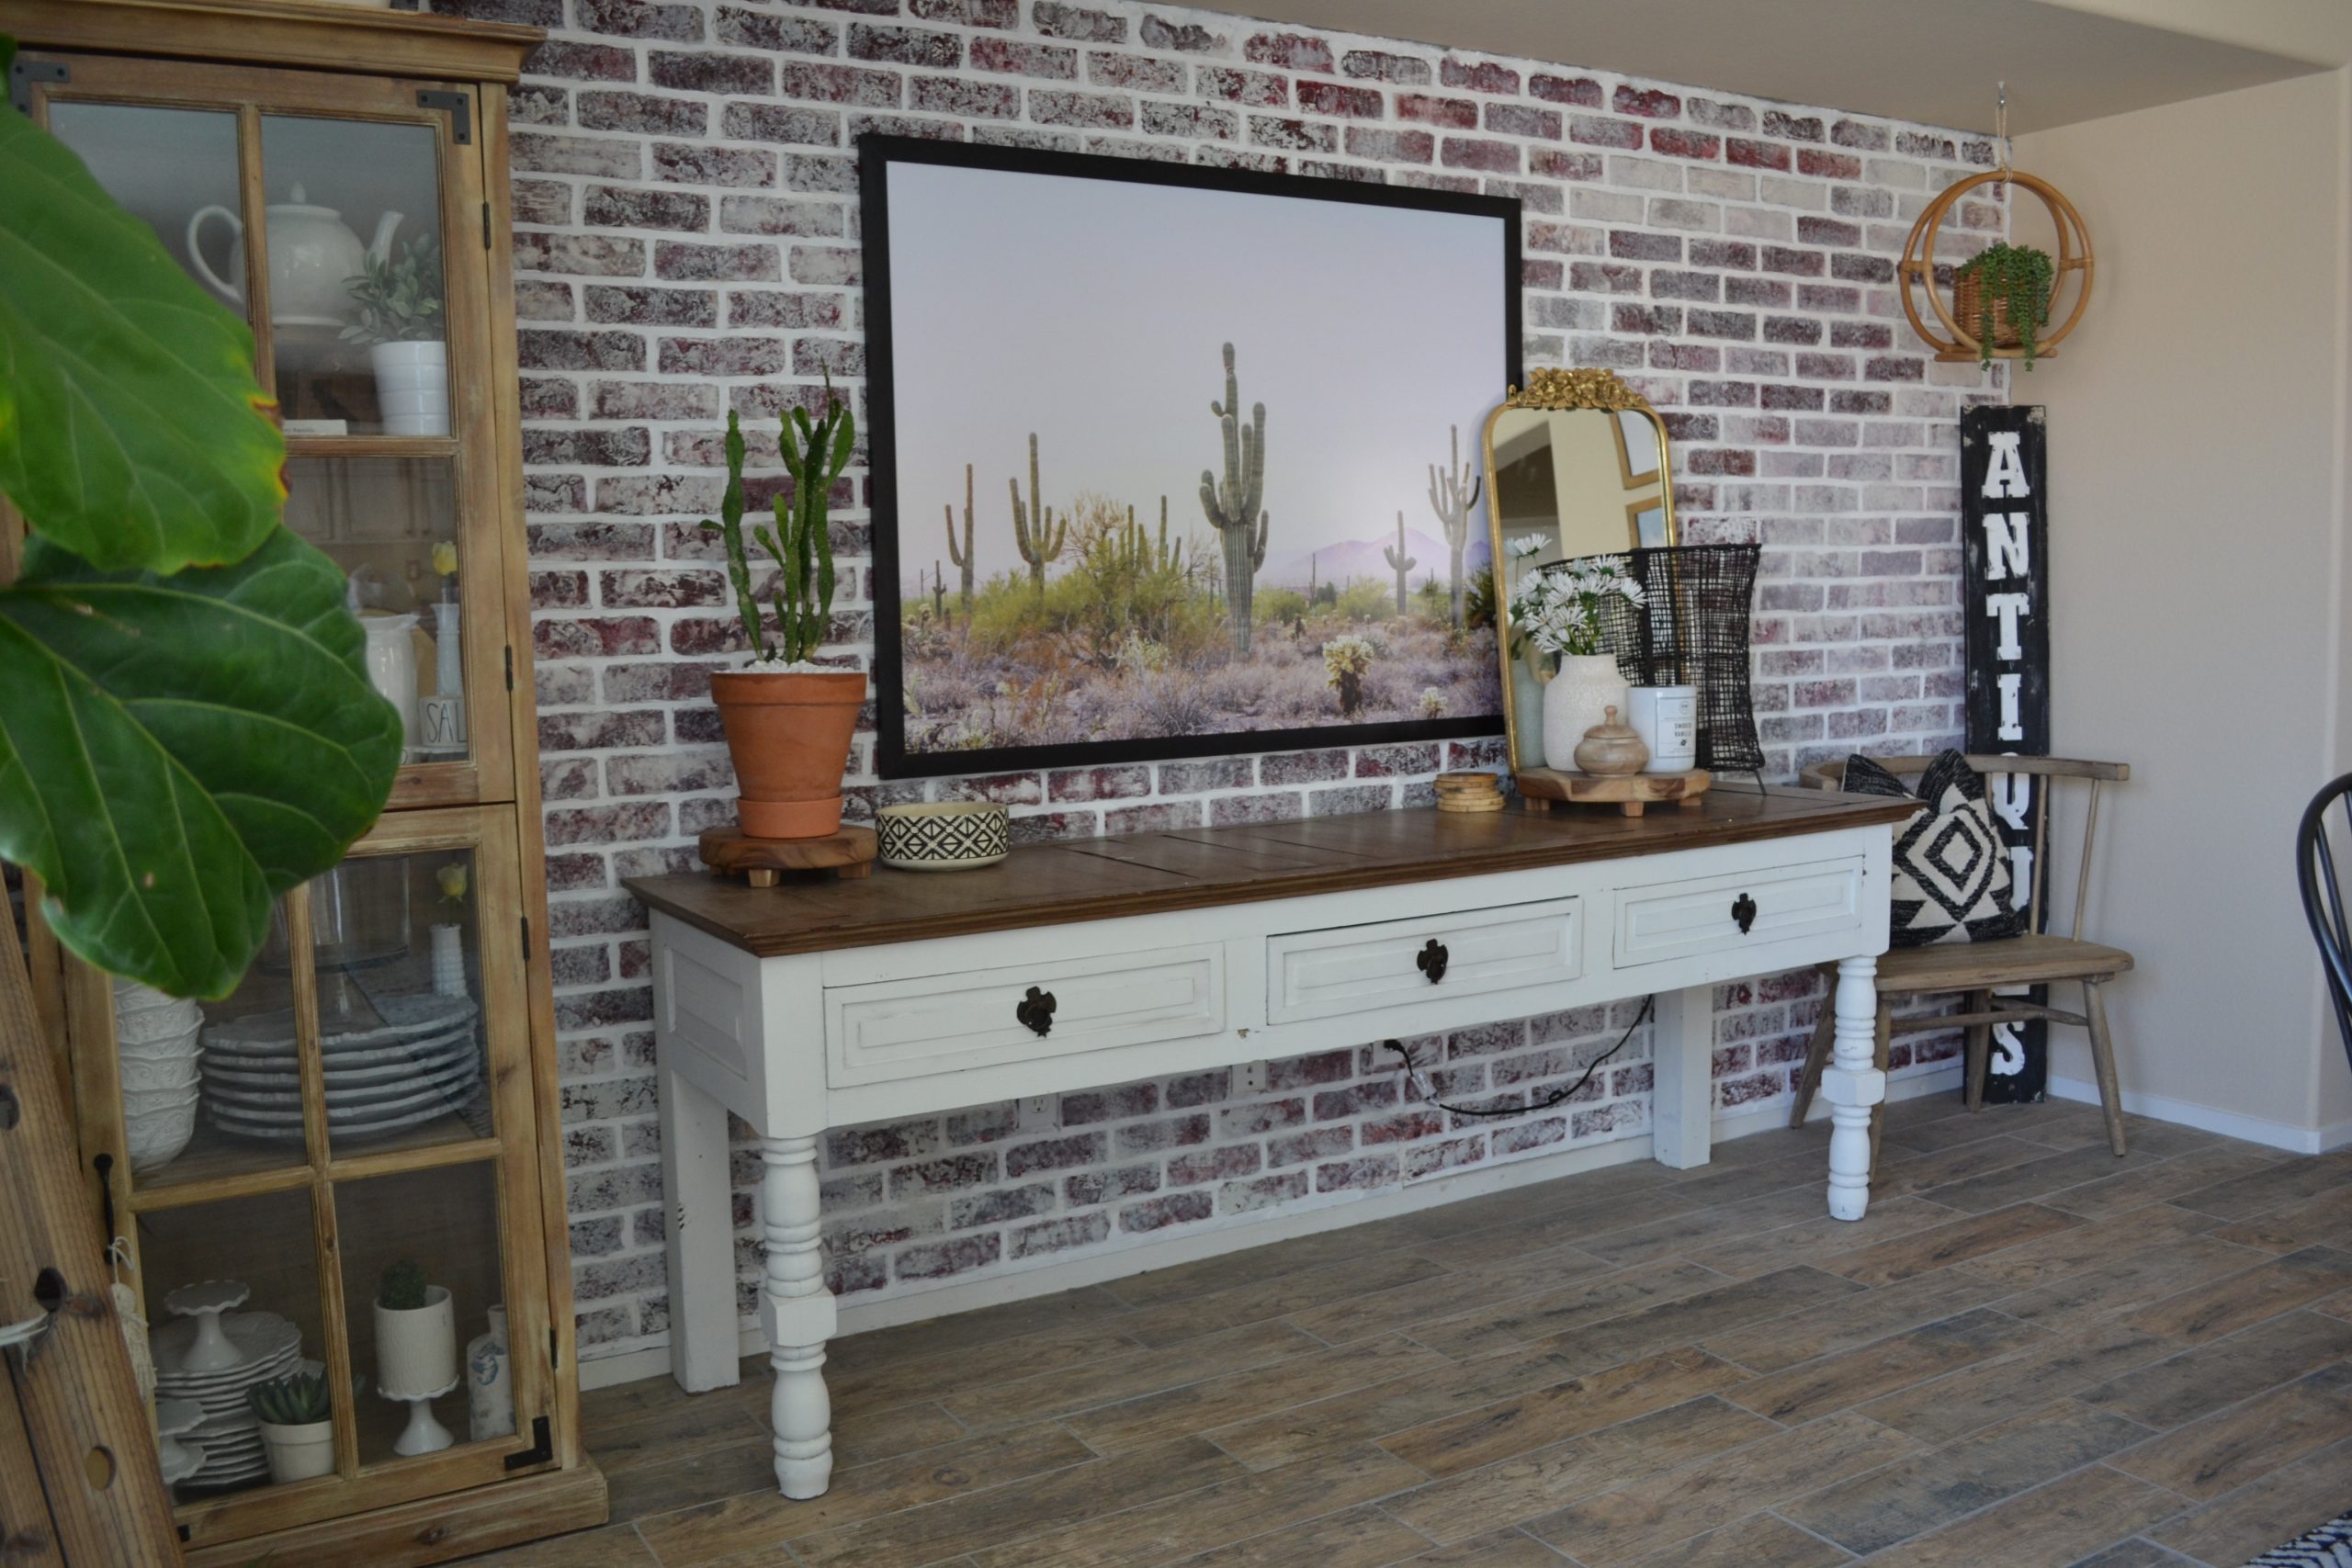 How to Hang a Frame on Any Wall: Brick kitchen wall with cactus art